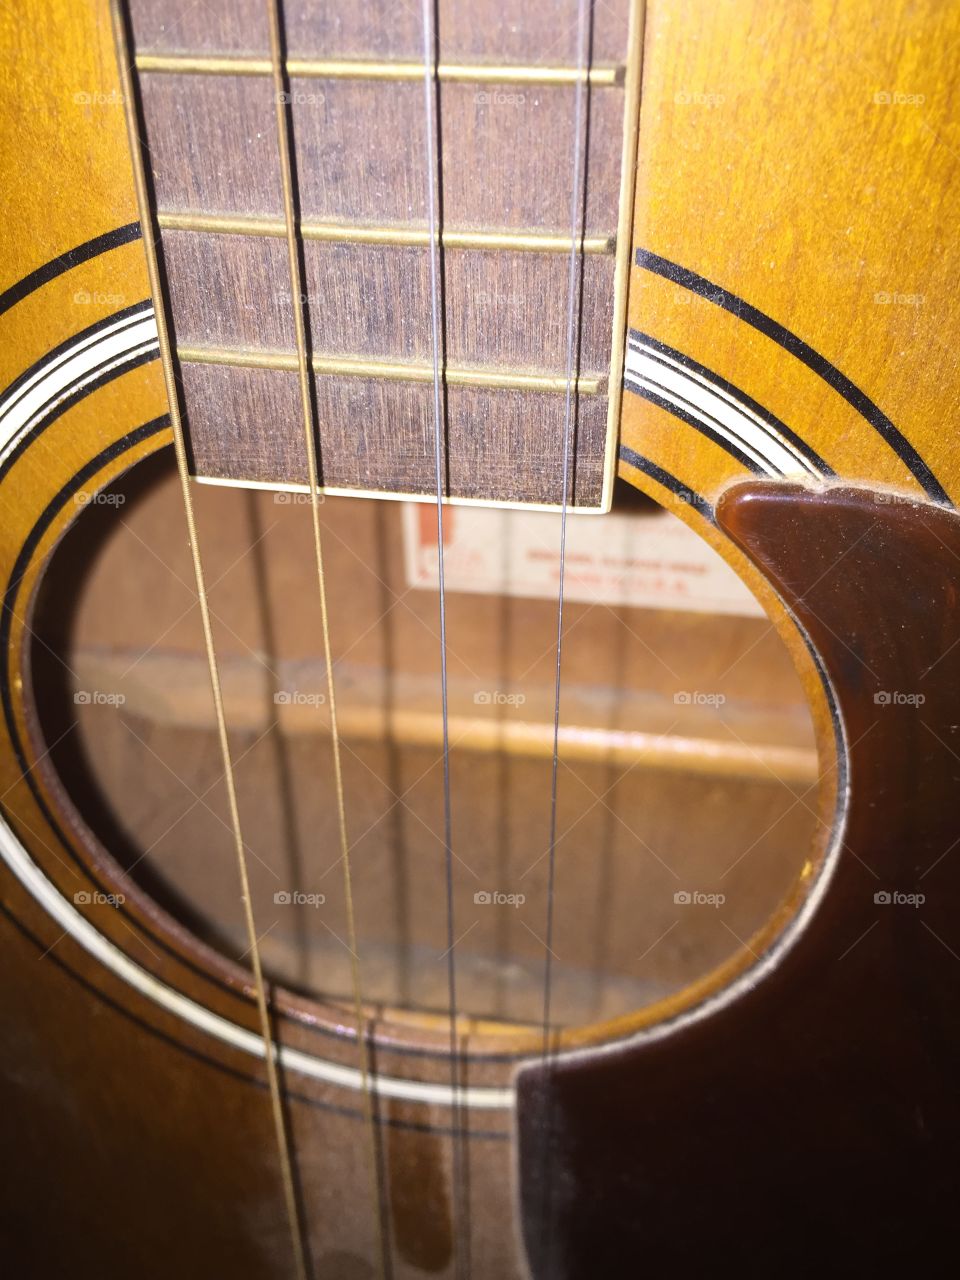 A four string guitar way up close, showing sound hole and strings.